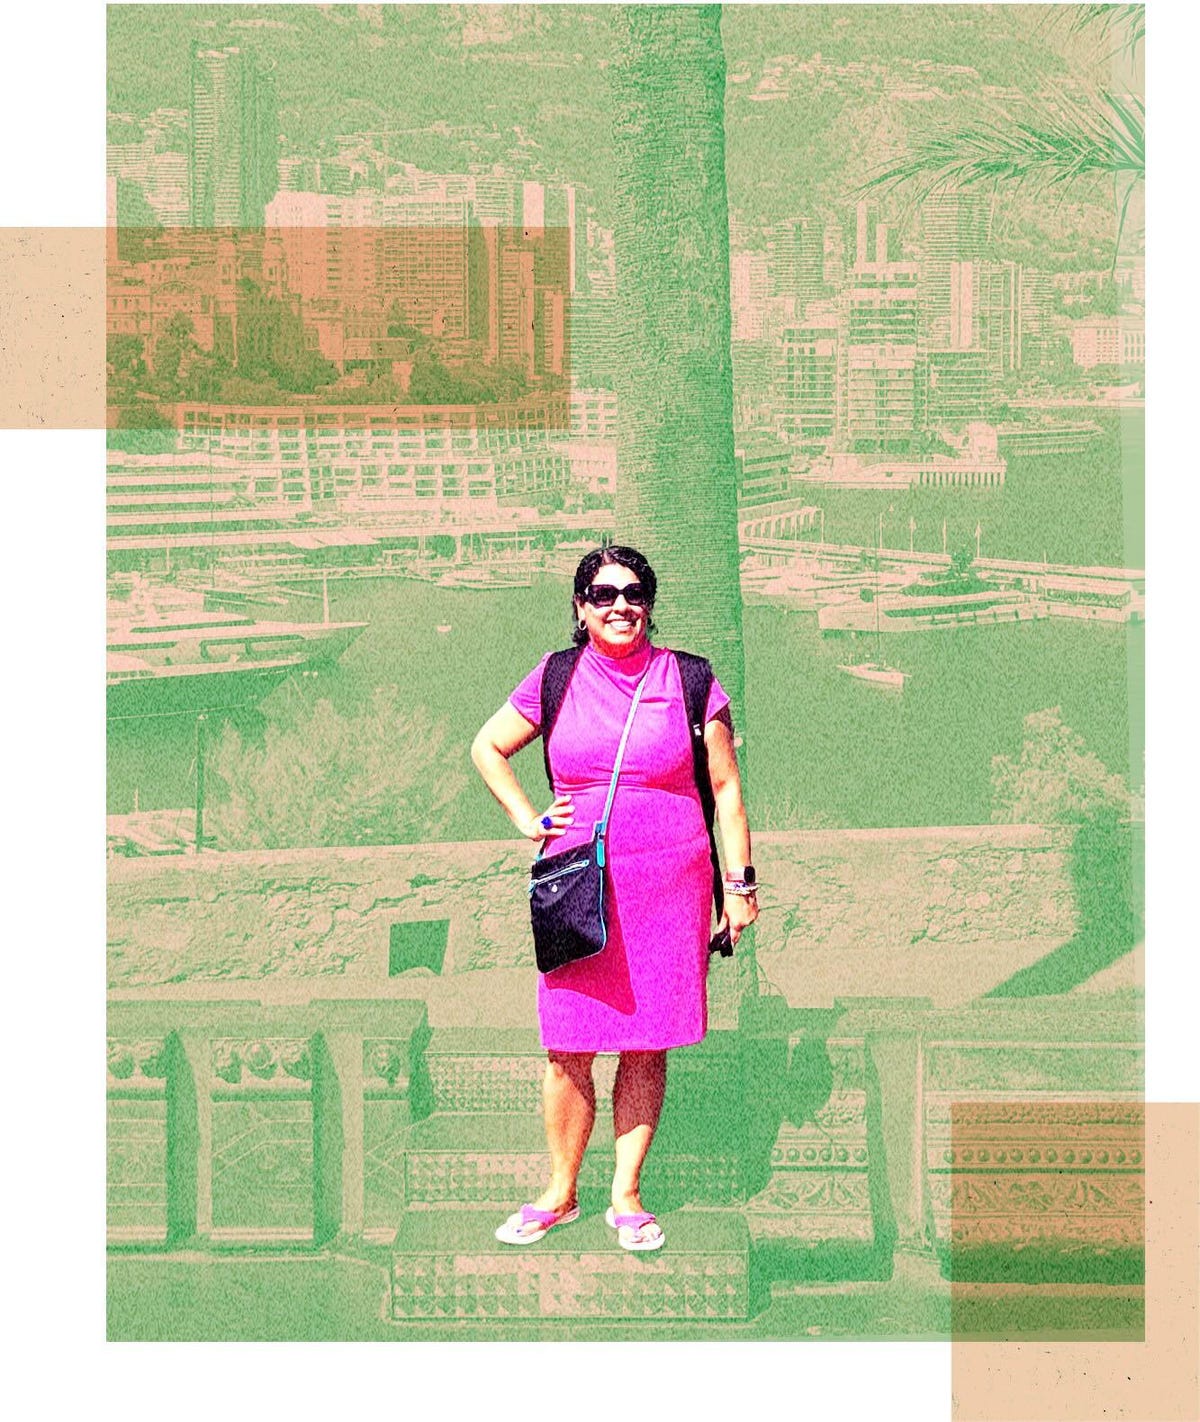 A woman in a dress against a backdrop of seaport